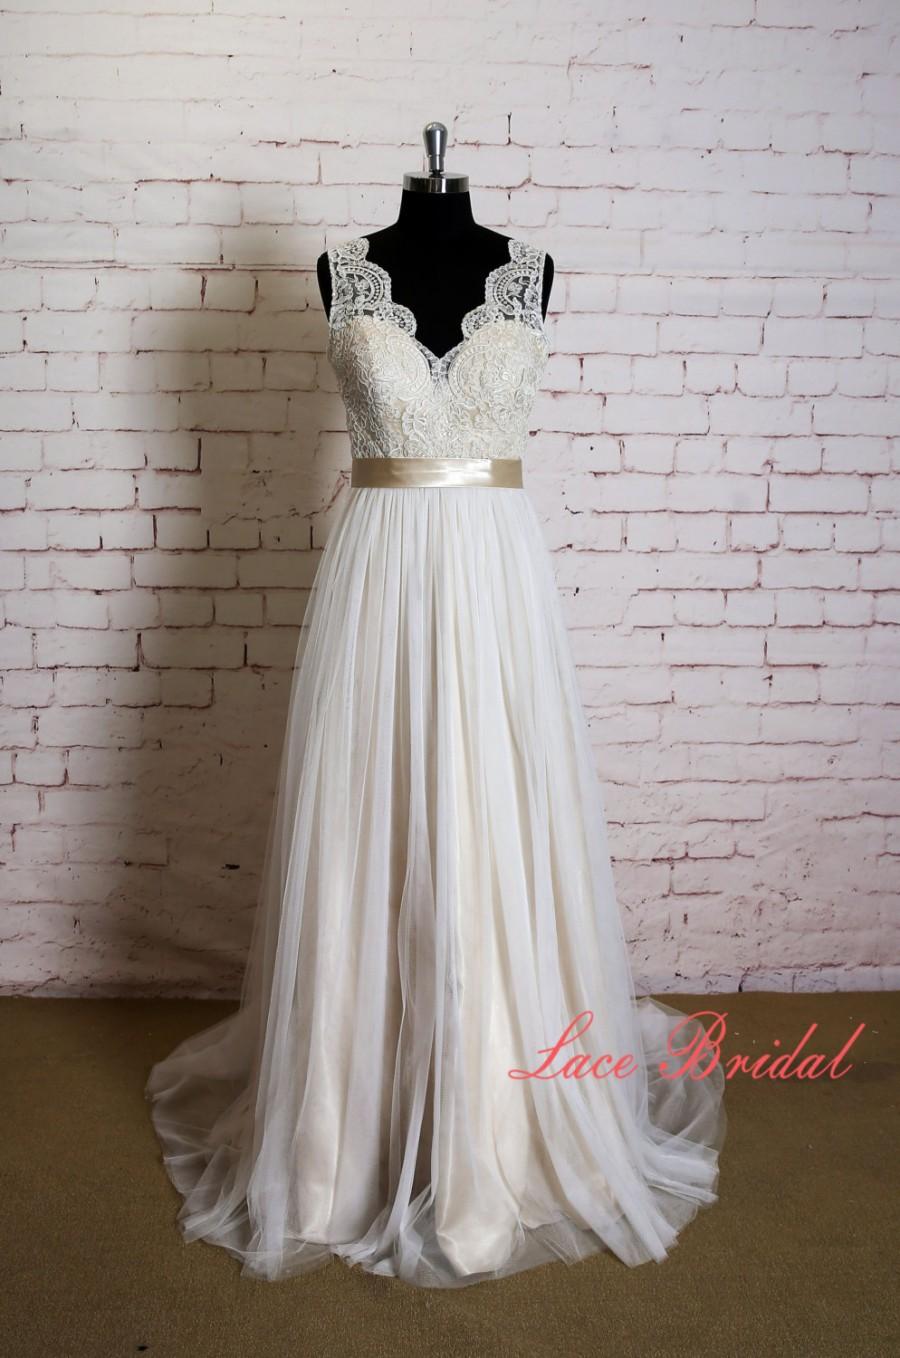 Mariage - Elegant Lace Wedding Dress with V Neck Simple Wedding Dress with Champagne Underlay Classic Ivory Overlay Bridal Gown with Sheer Tulle Train